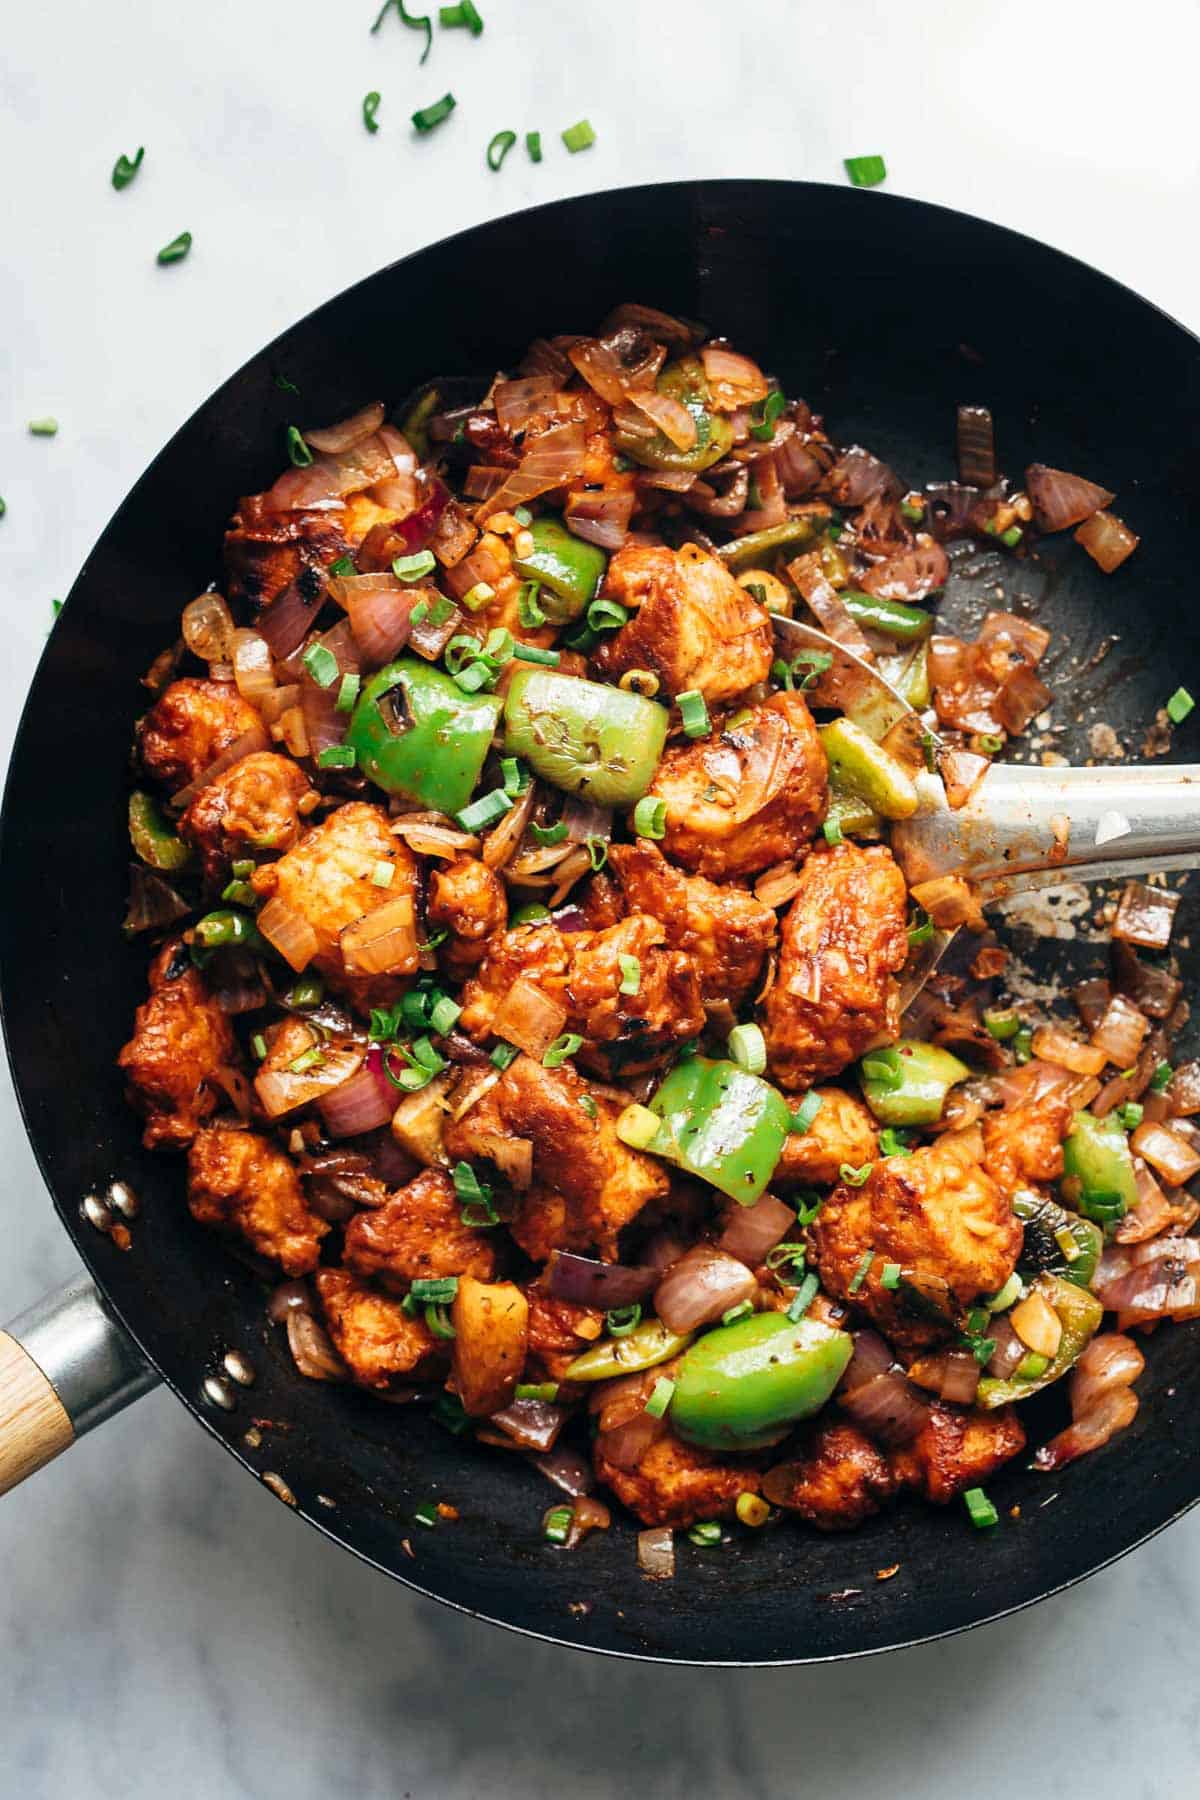 Easy Chinese Chilli Chicken Dry in a black wok.